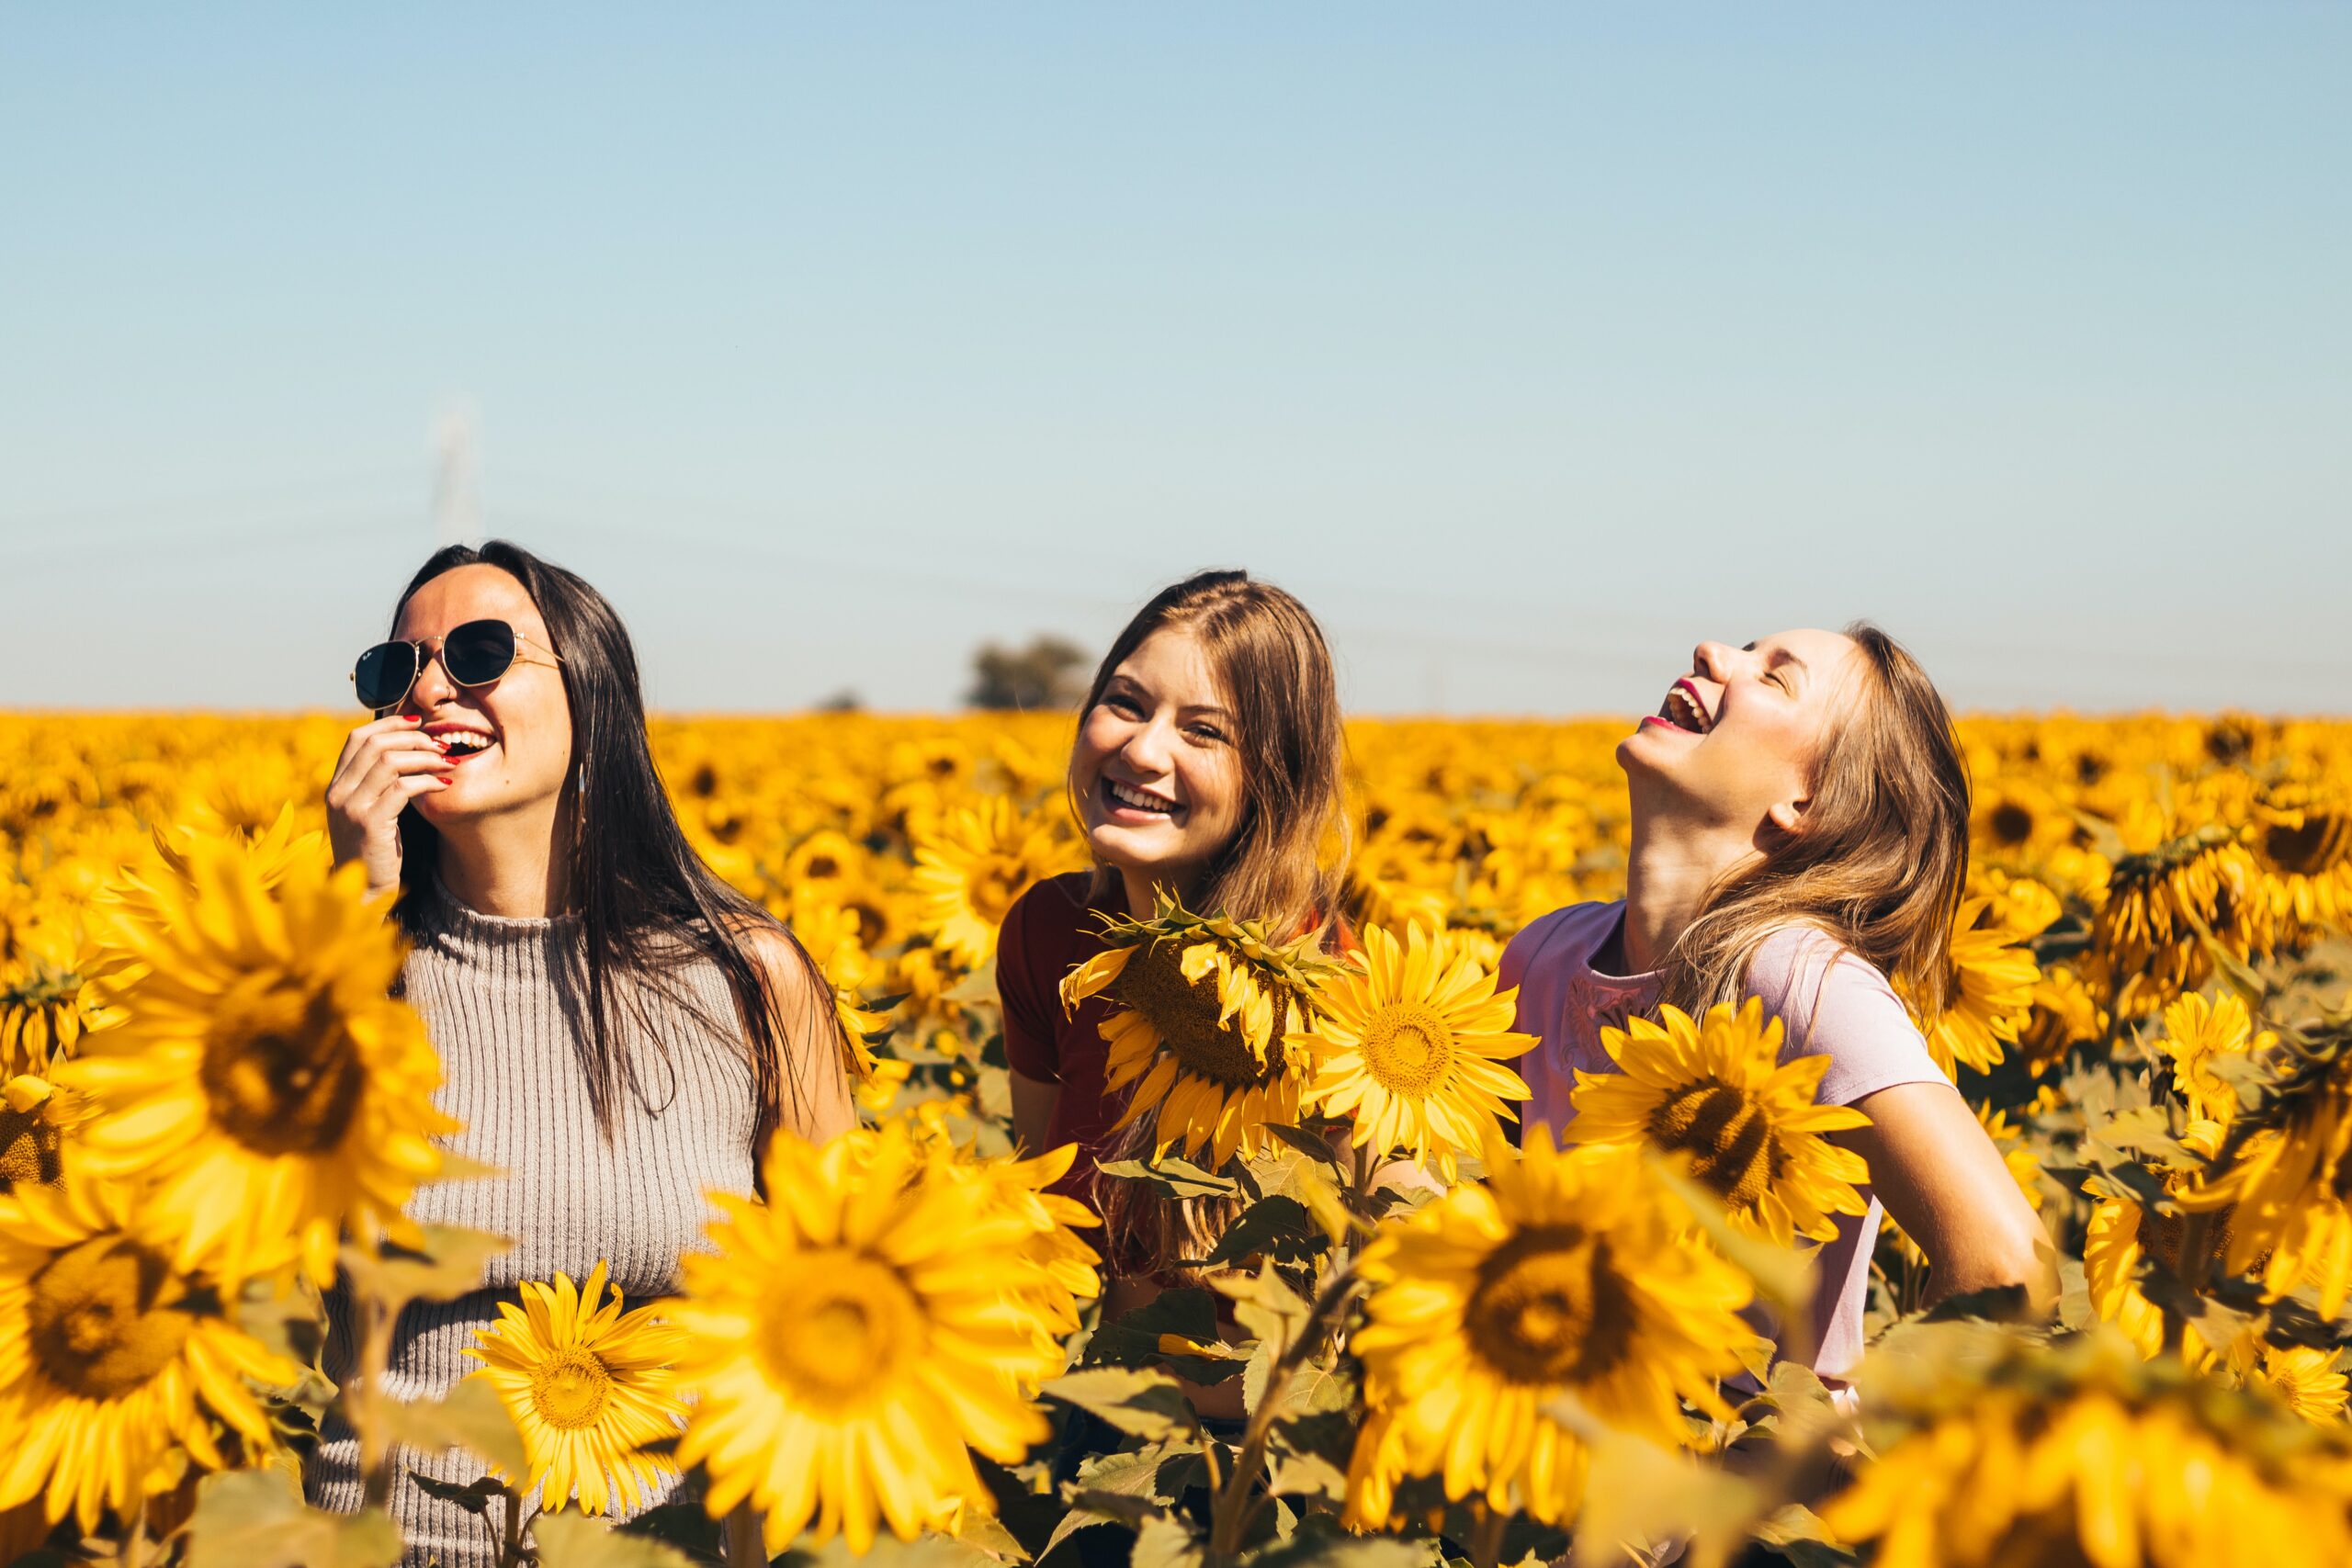 3 women amongst sunflowers feeling confident and happy with positive self-esteem